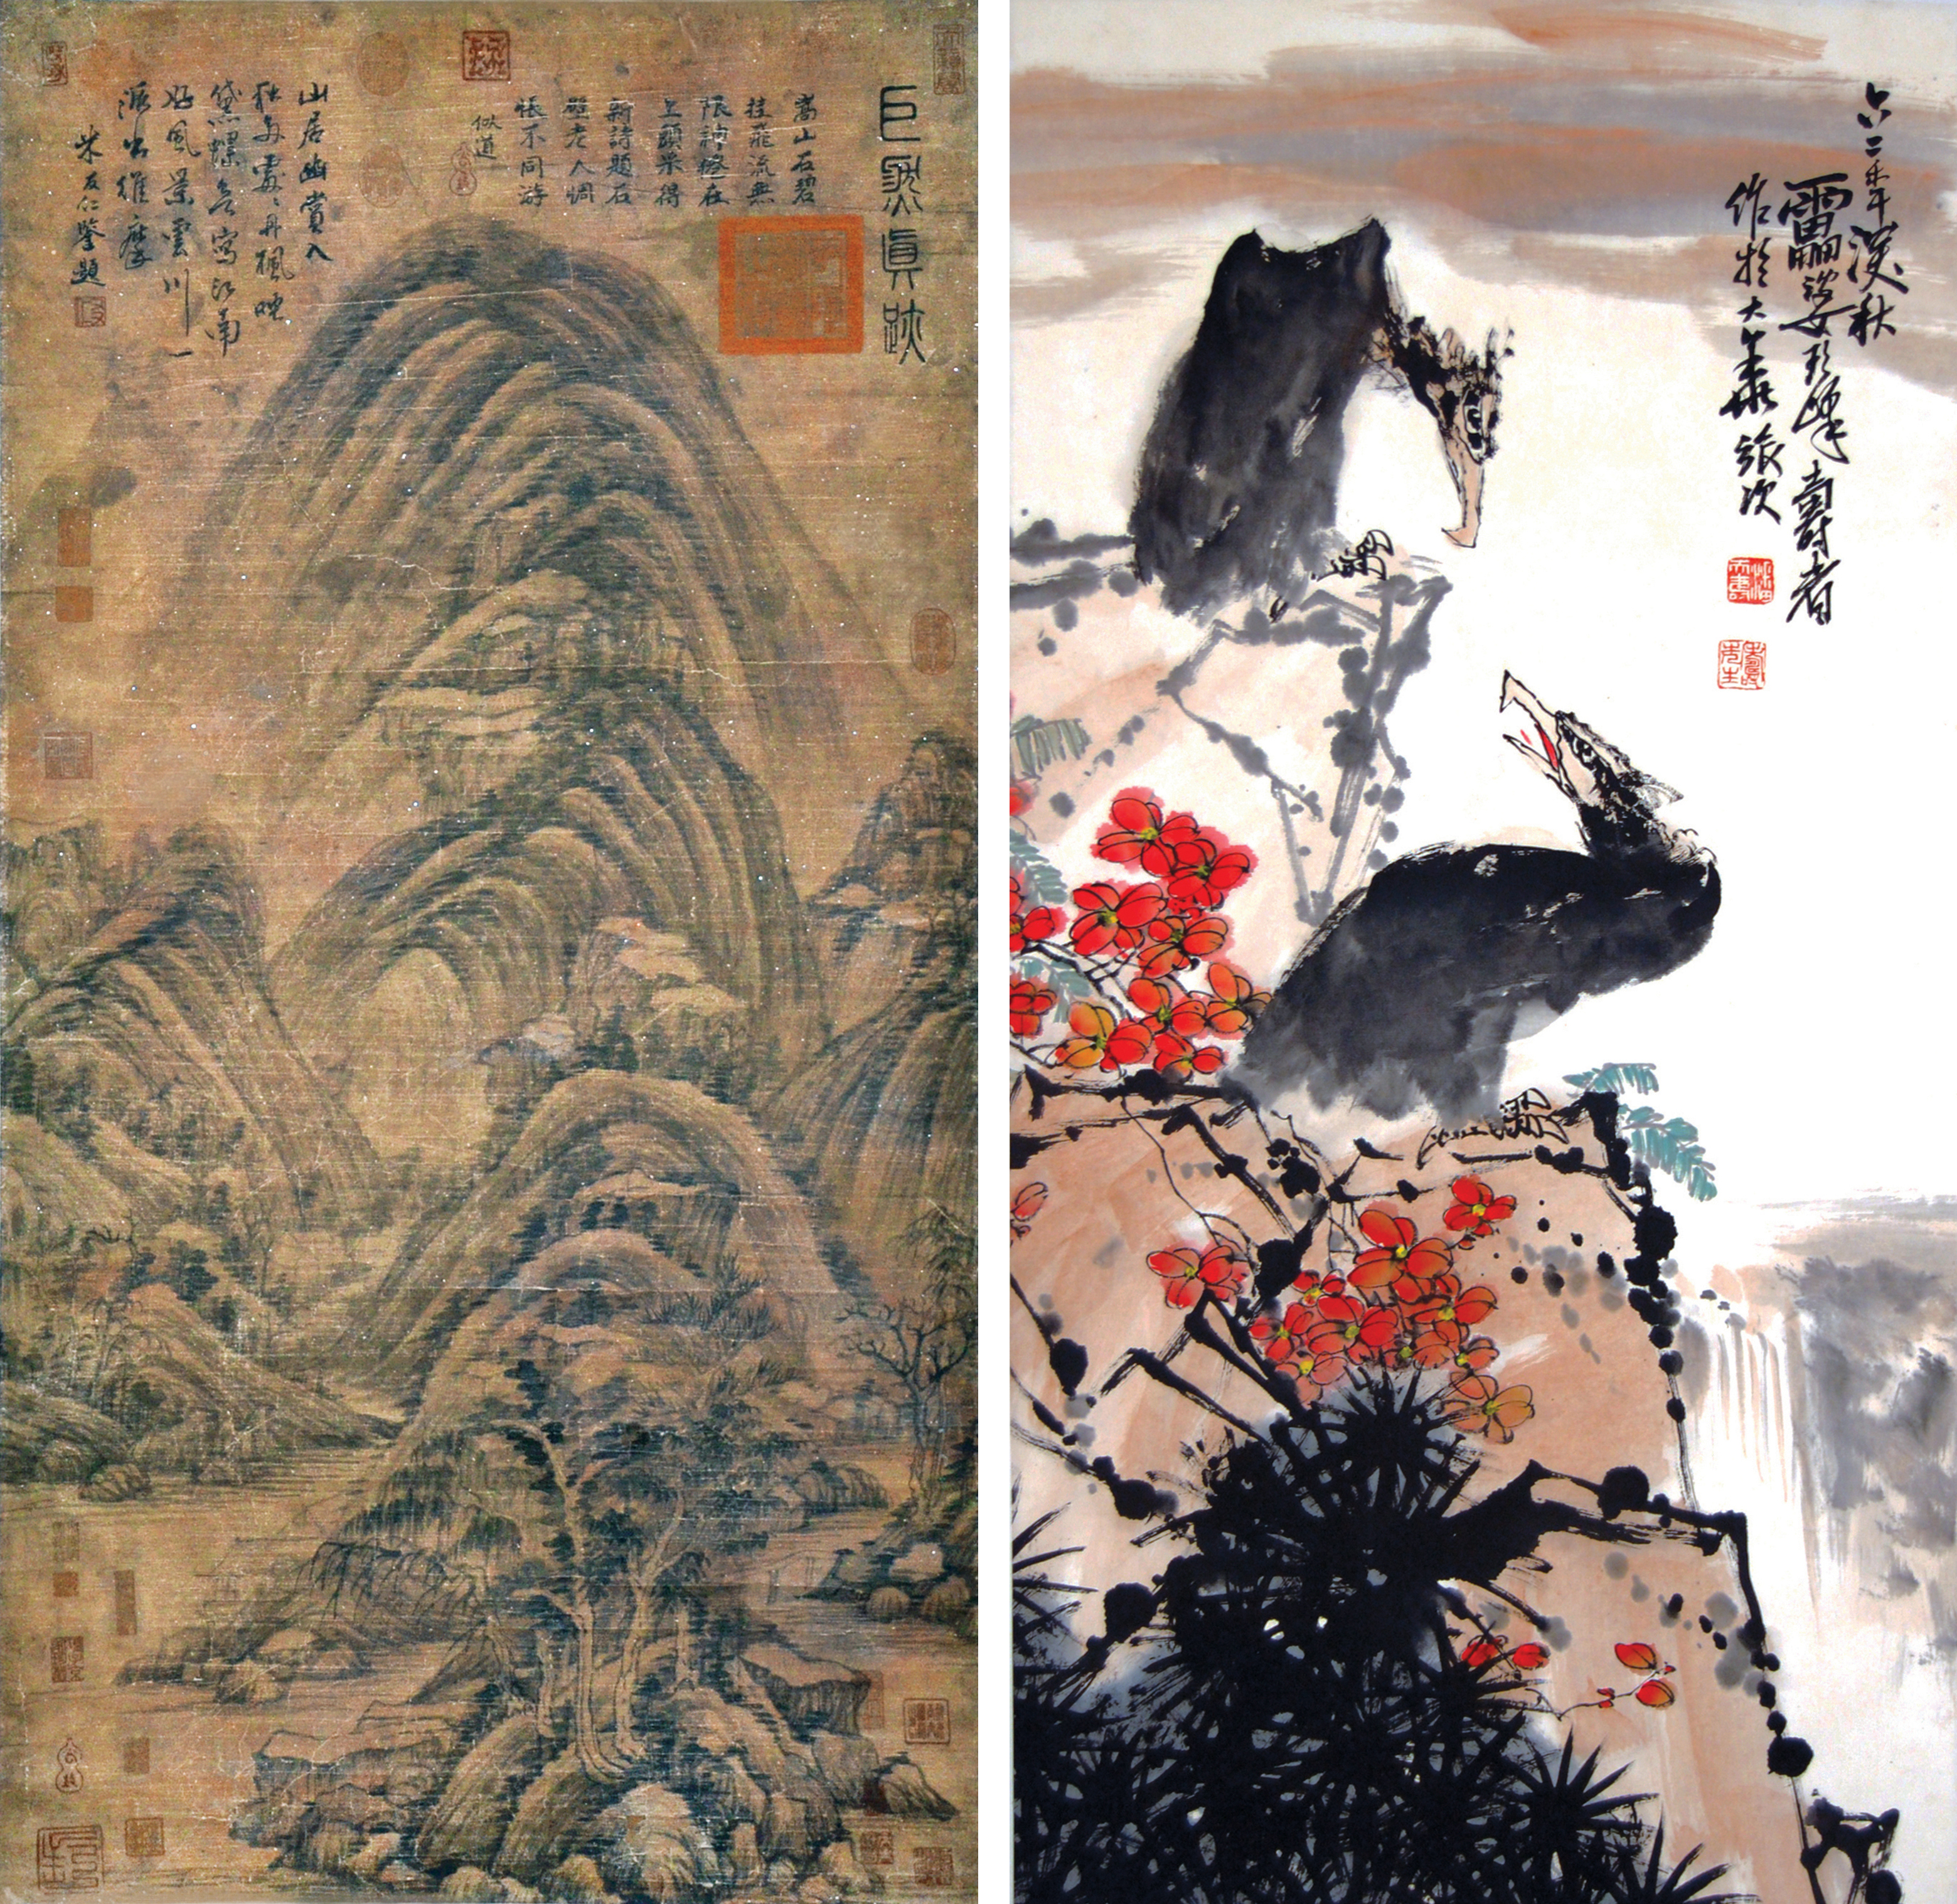 Gianguan Auctions chronicles paintings, calligraphy highlights